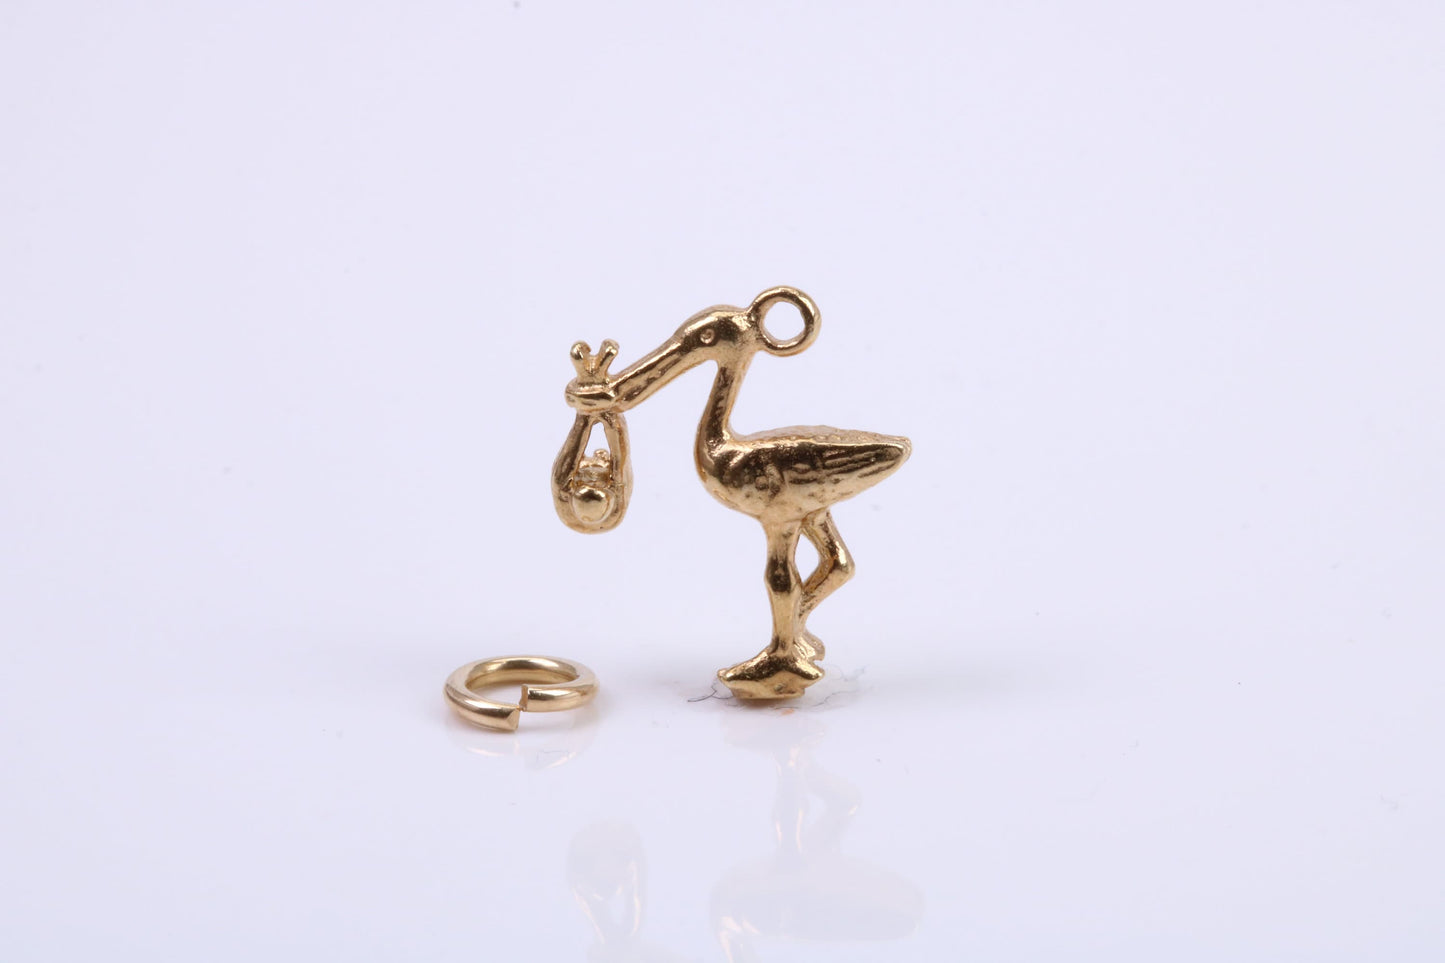 Flying Stork Delivering Baby Charm, Traditional Charm, Made from Solid 9ct Yellow Gold, British Hallmarked, Complete with Attachment Link